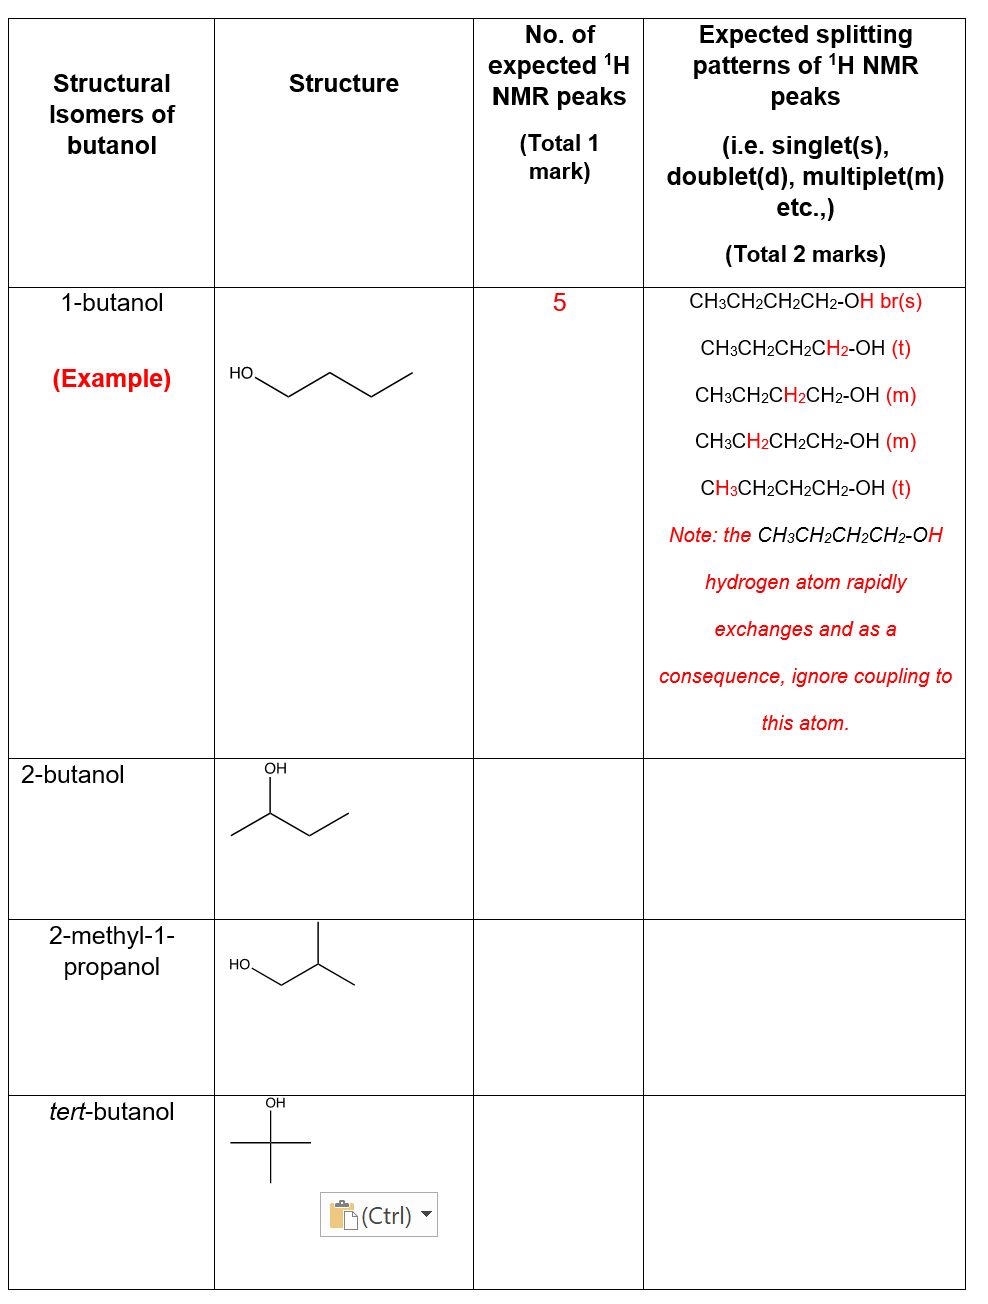 Structural
Isomers of
butanol
1-butanol
(Example)
2-butanol
2-methyl-1-
propanol
tert-butanol
HO
HO
OH
OH
Structure
(Ctrl) -
No. of
expected ¹H
NMR peaks
(Total 1
mark)
5
Expected splitting
patterns of ¹H NMR
peaks
(i.e. singlet(s),
doublet(d), multiplet(m)
etc.,)
(Total 2 marks)
CH3CH2CH2CH2-OH br(s)
CH3CH2CH2CH2-OH (t)
CH3CH2CH2CH2-OH (m)
CH3CH2CH2CH2-OH (m)
CH3CH2CH2CH2-OH (t)
Note: the CH3CH2CH2CH2-OH
hydrogen atom rapidly
exchanges and as a
consequence, ignore coupling to
this atom.